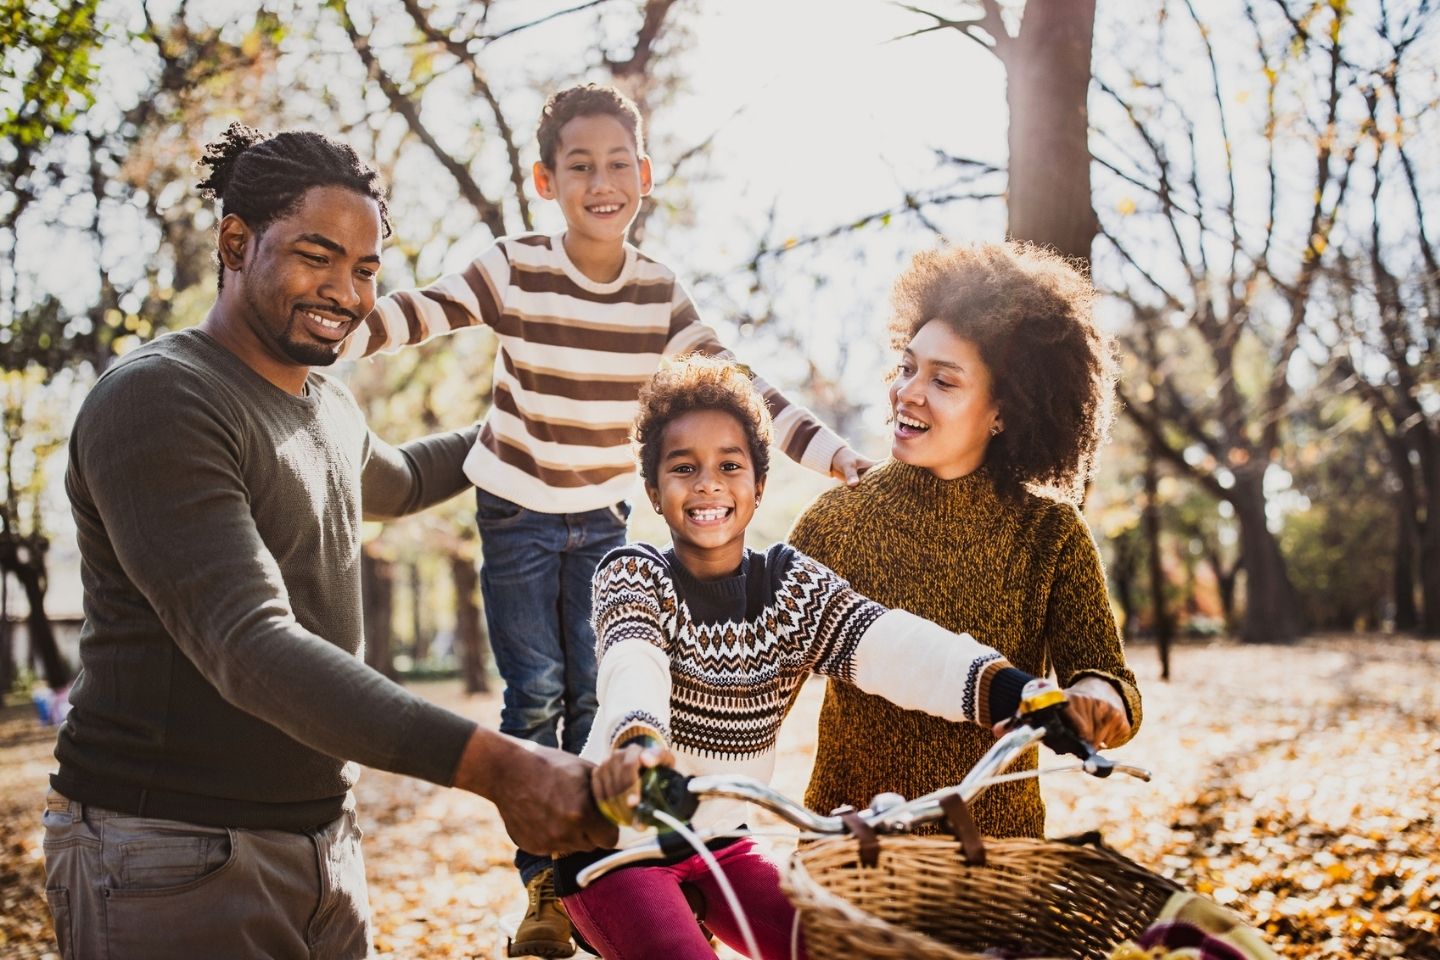 7 Fall Family Vacation Ideas to Create Memorable Autumn Adventures